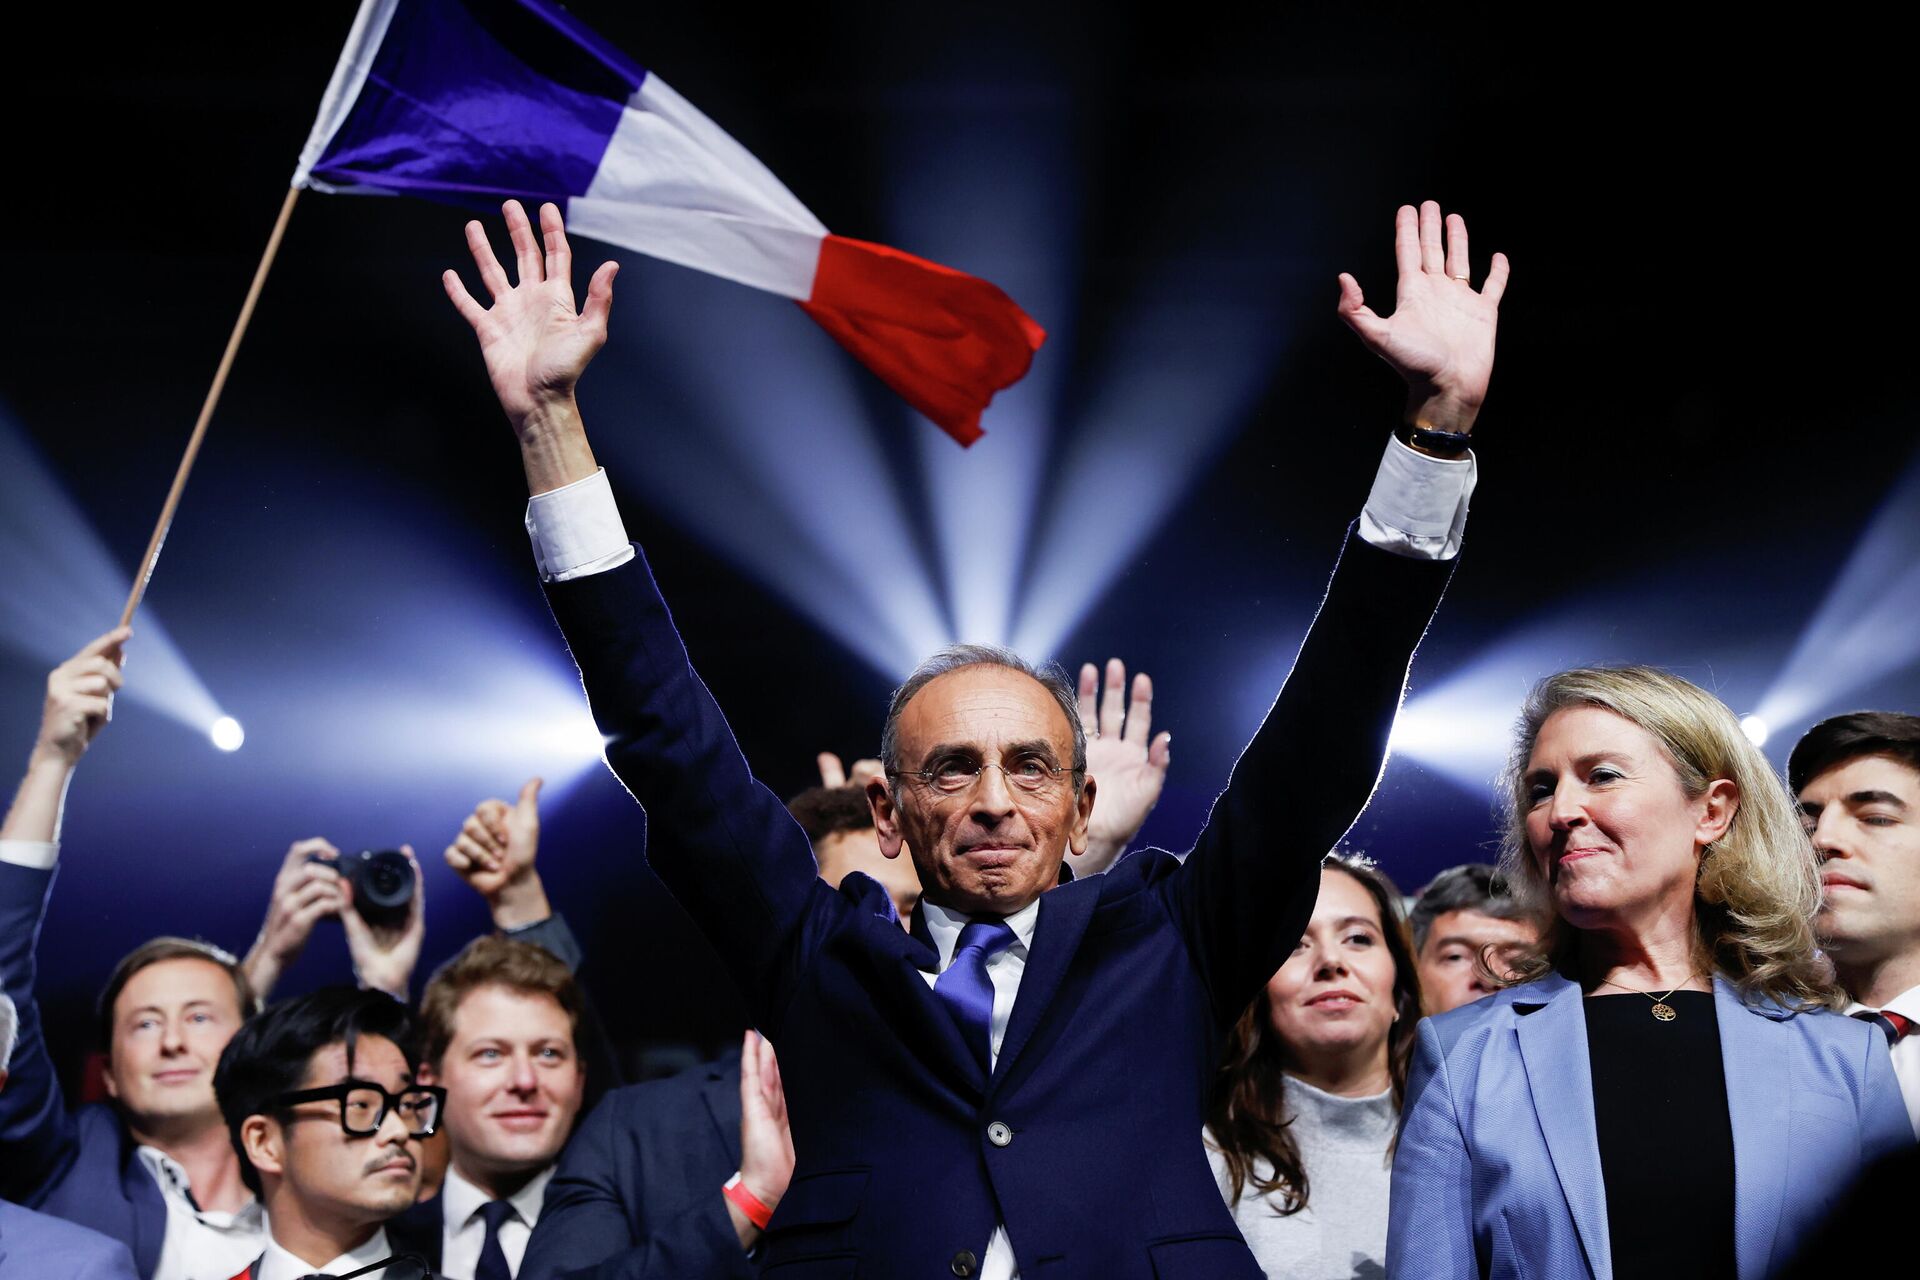 French right-wing commentator Eric Zemmour, a candidate in the 2022 French presidential election, attends a political campaign rally in Villepinte near Paris, France, 5 December 2021. - Sputnik International, 1920, 07.12.2021